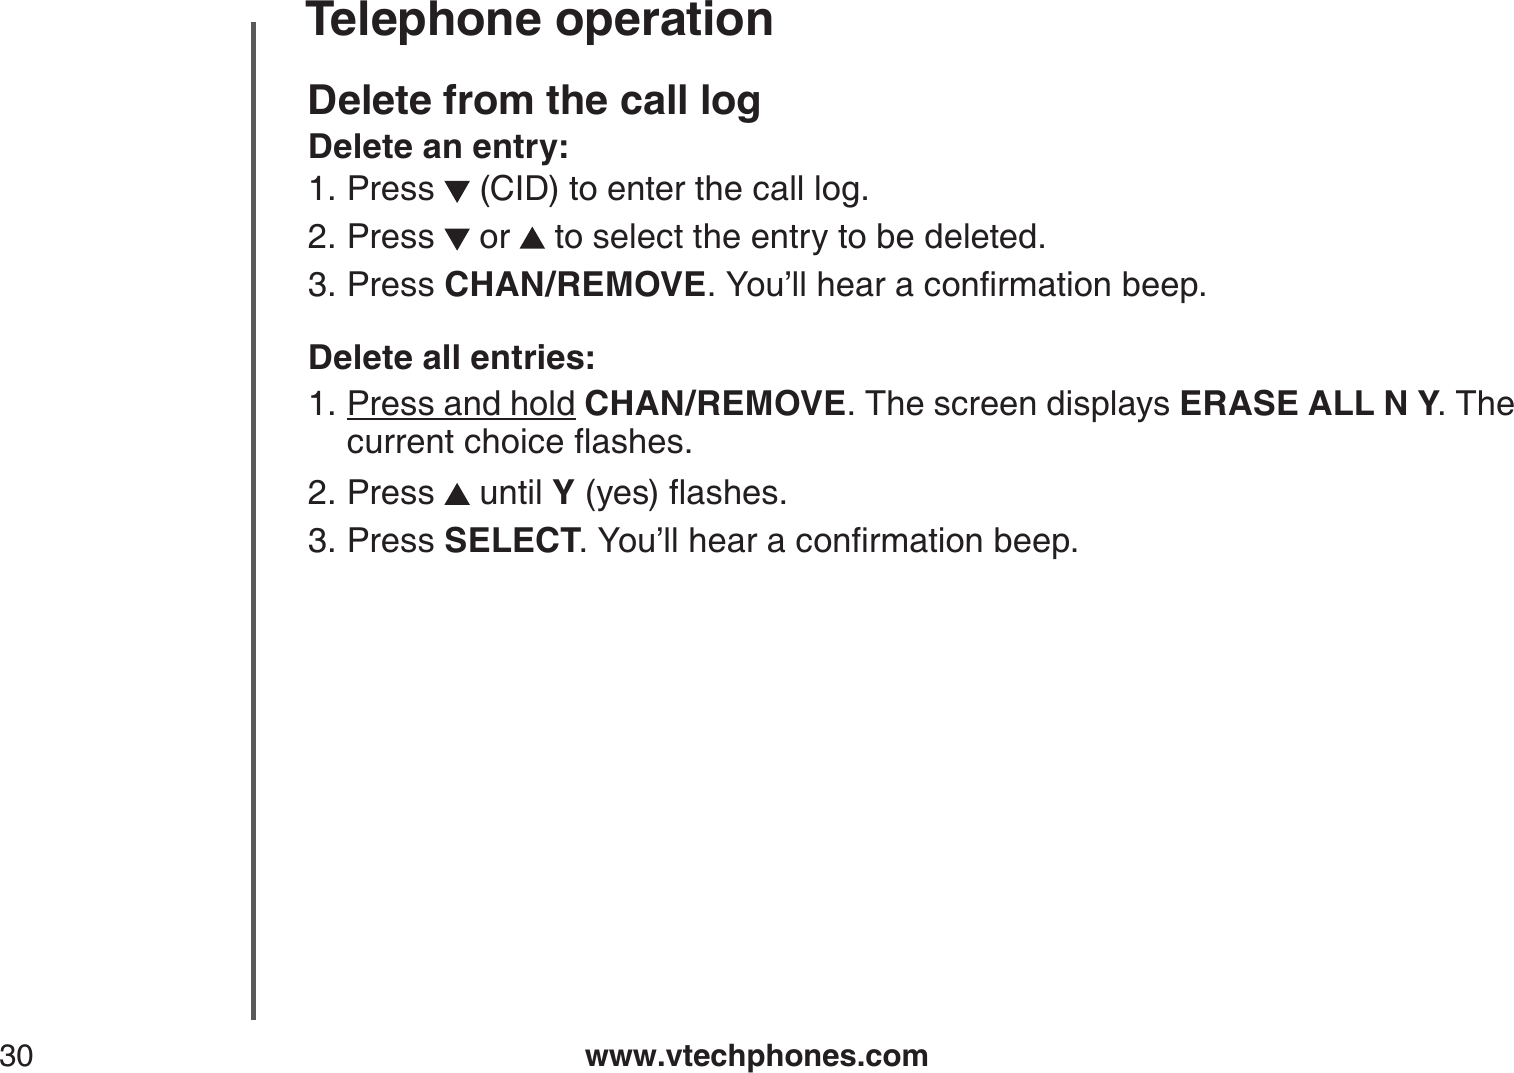 www.vtechphones.com30Telephone operationDelete from the call logDelete an entry:Press   (CID) to enter the call log. Press   or   to select the entry to be deleted.Press CHAN/REMOVE;QWŏNNJGCTCEQPſTOCVKQPDGGRDelete all entries:Press and hold CHAN/REMOVE. The screen displays ERASE ALL N Y. The EWTTGPVEJQKEGƀCUJGUPress   until Y(yes)ƀCUJGUPress SELECT;QWŏNNJGCTCEQPſTOCVKQPDGGR1.2.3.1.2.3.